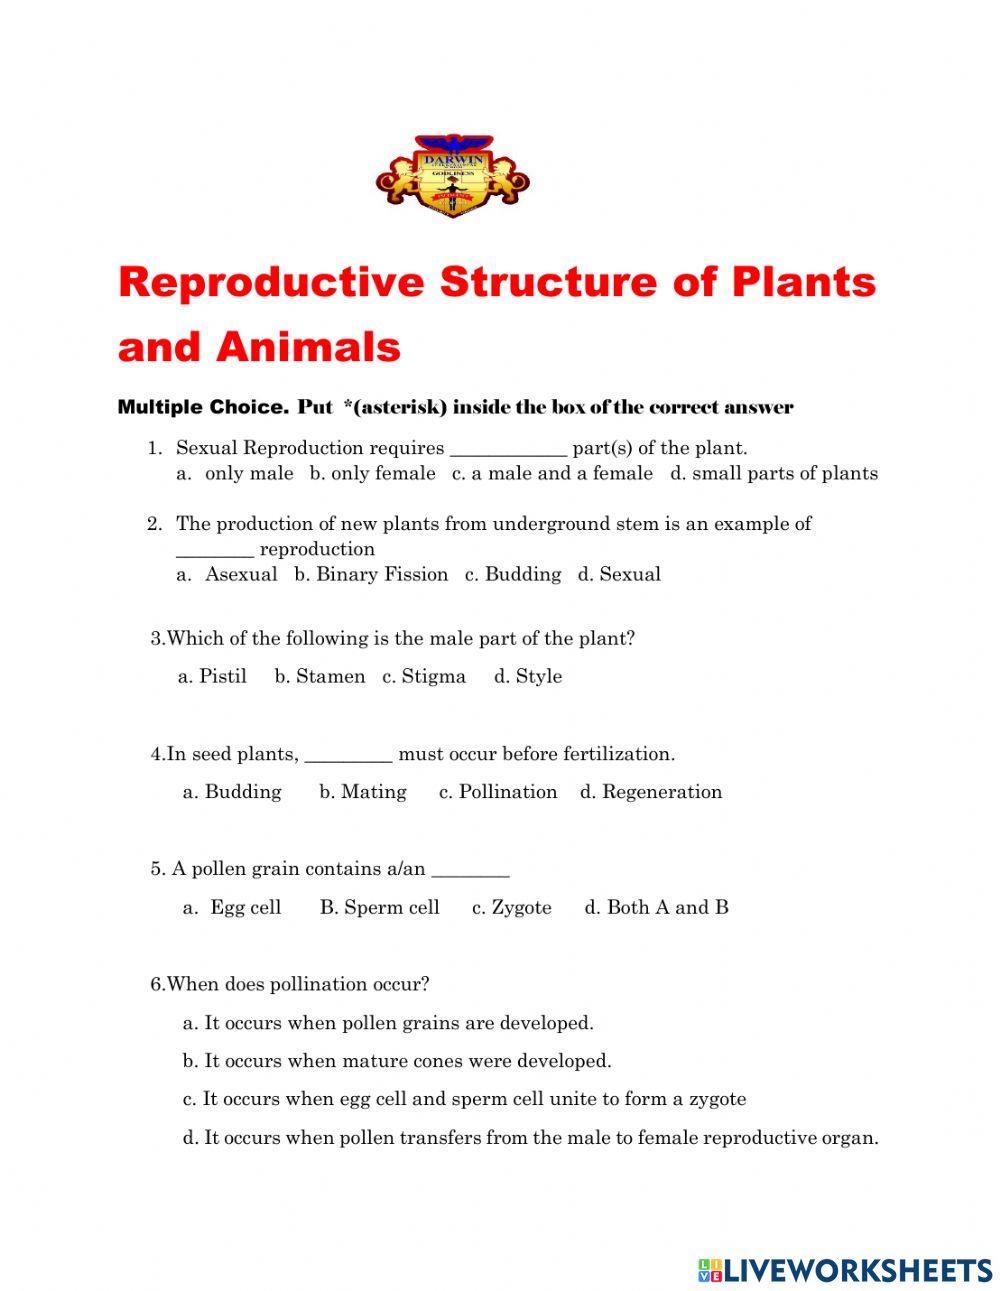 Reproductive Structure of Plants and Animals